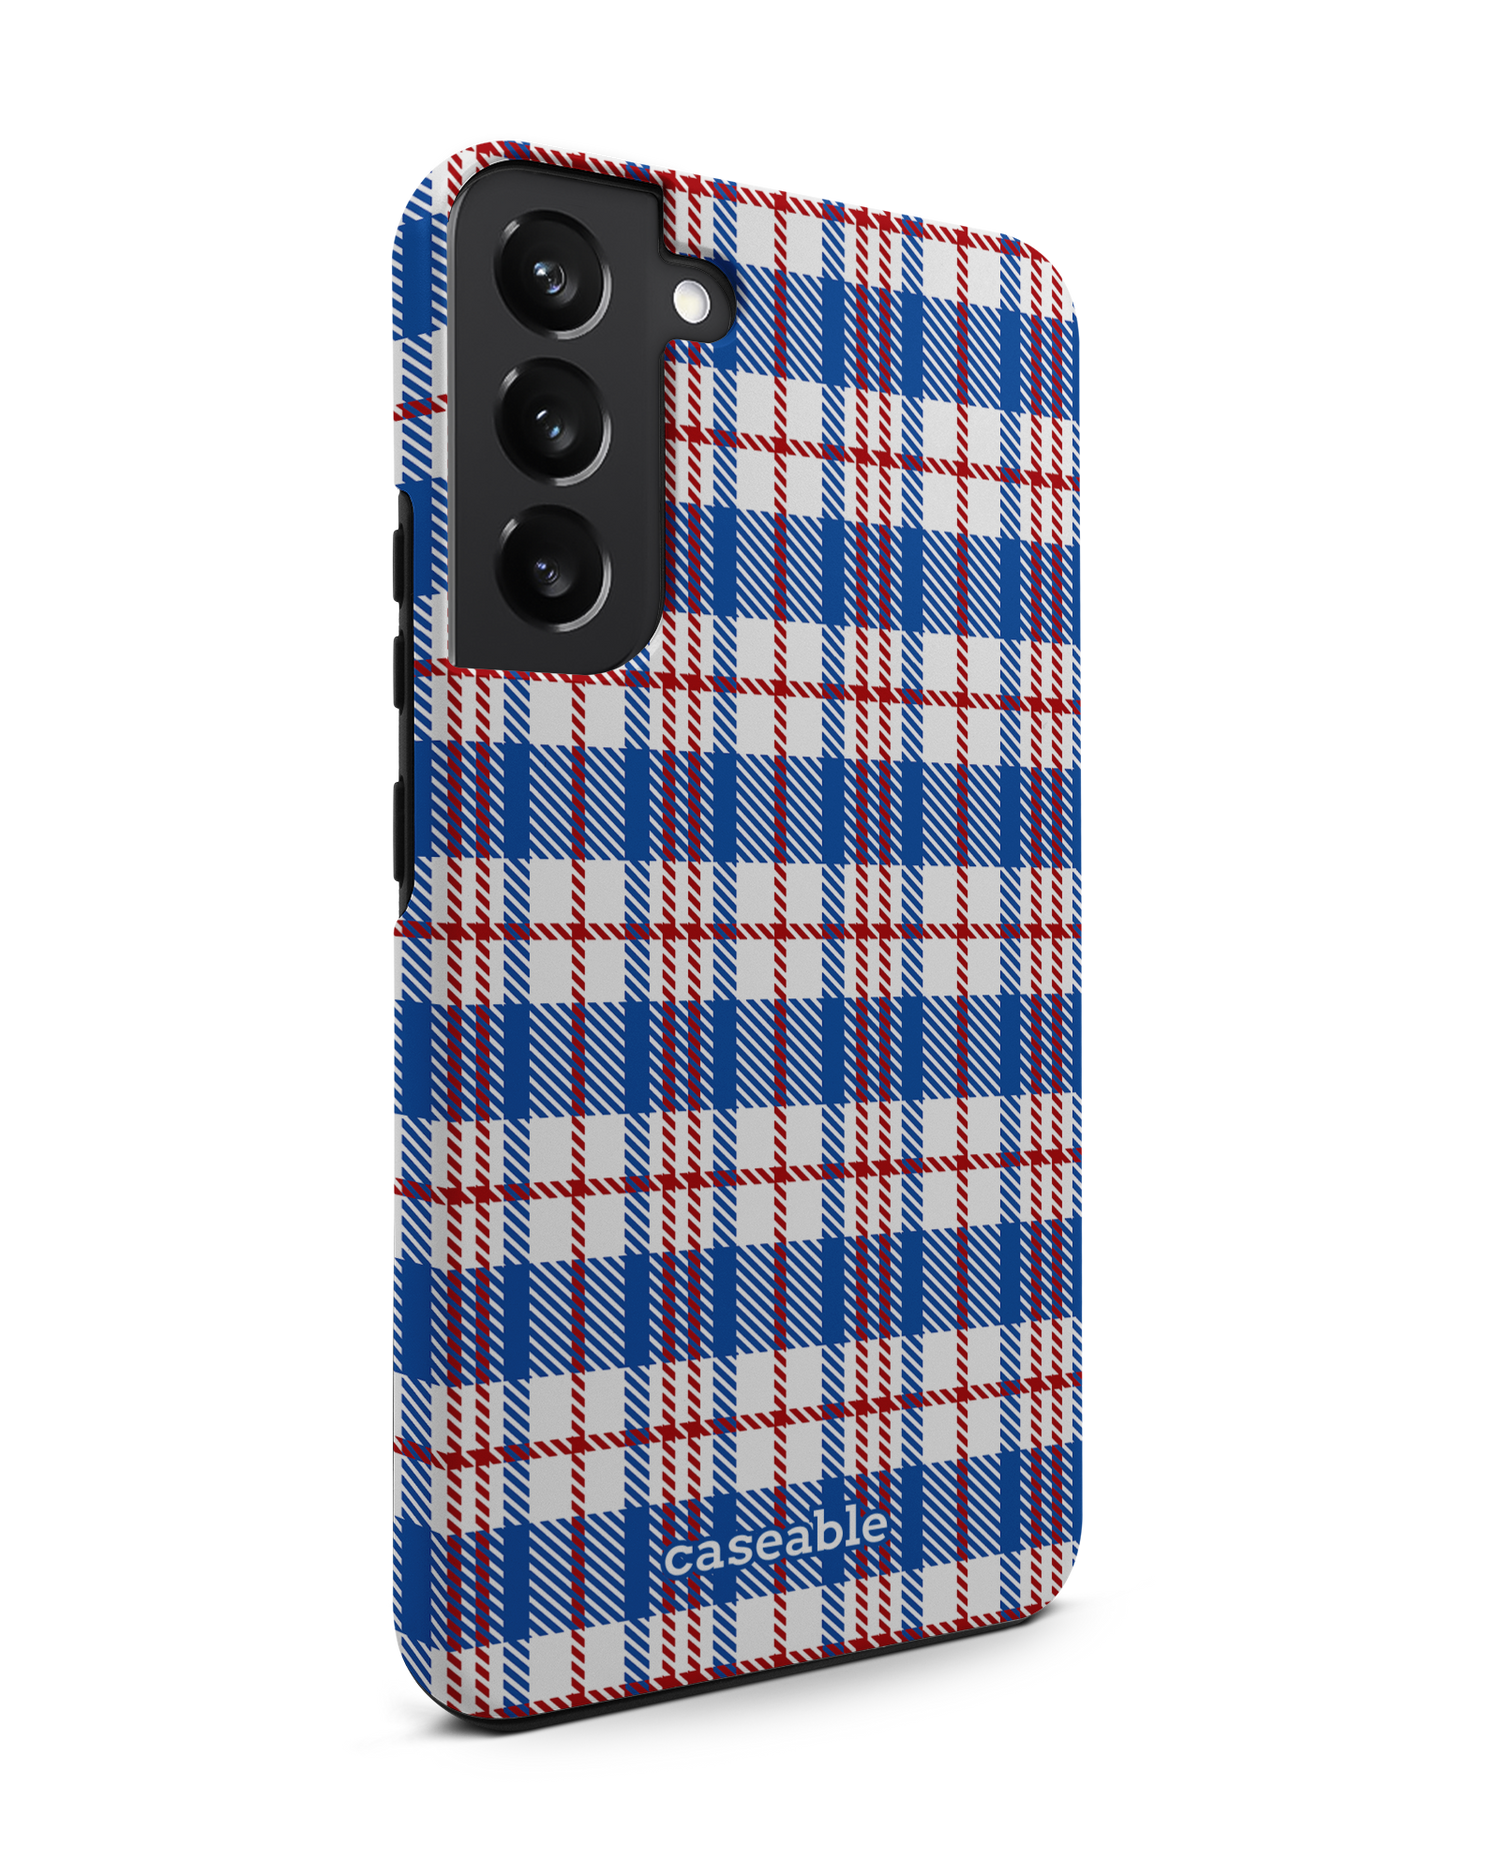 Plaid Market Bag Premium Phone Case Samsung Galaxy S22 Plus 5G: View from the left side